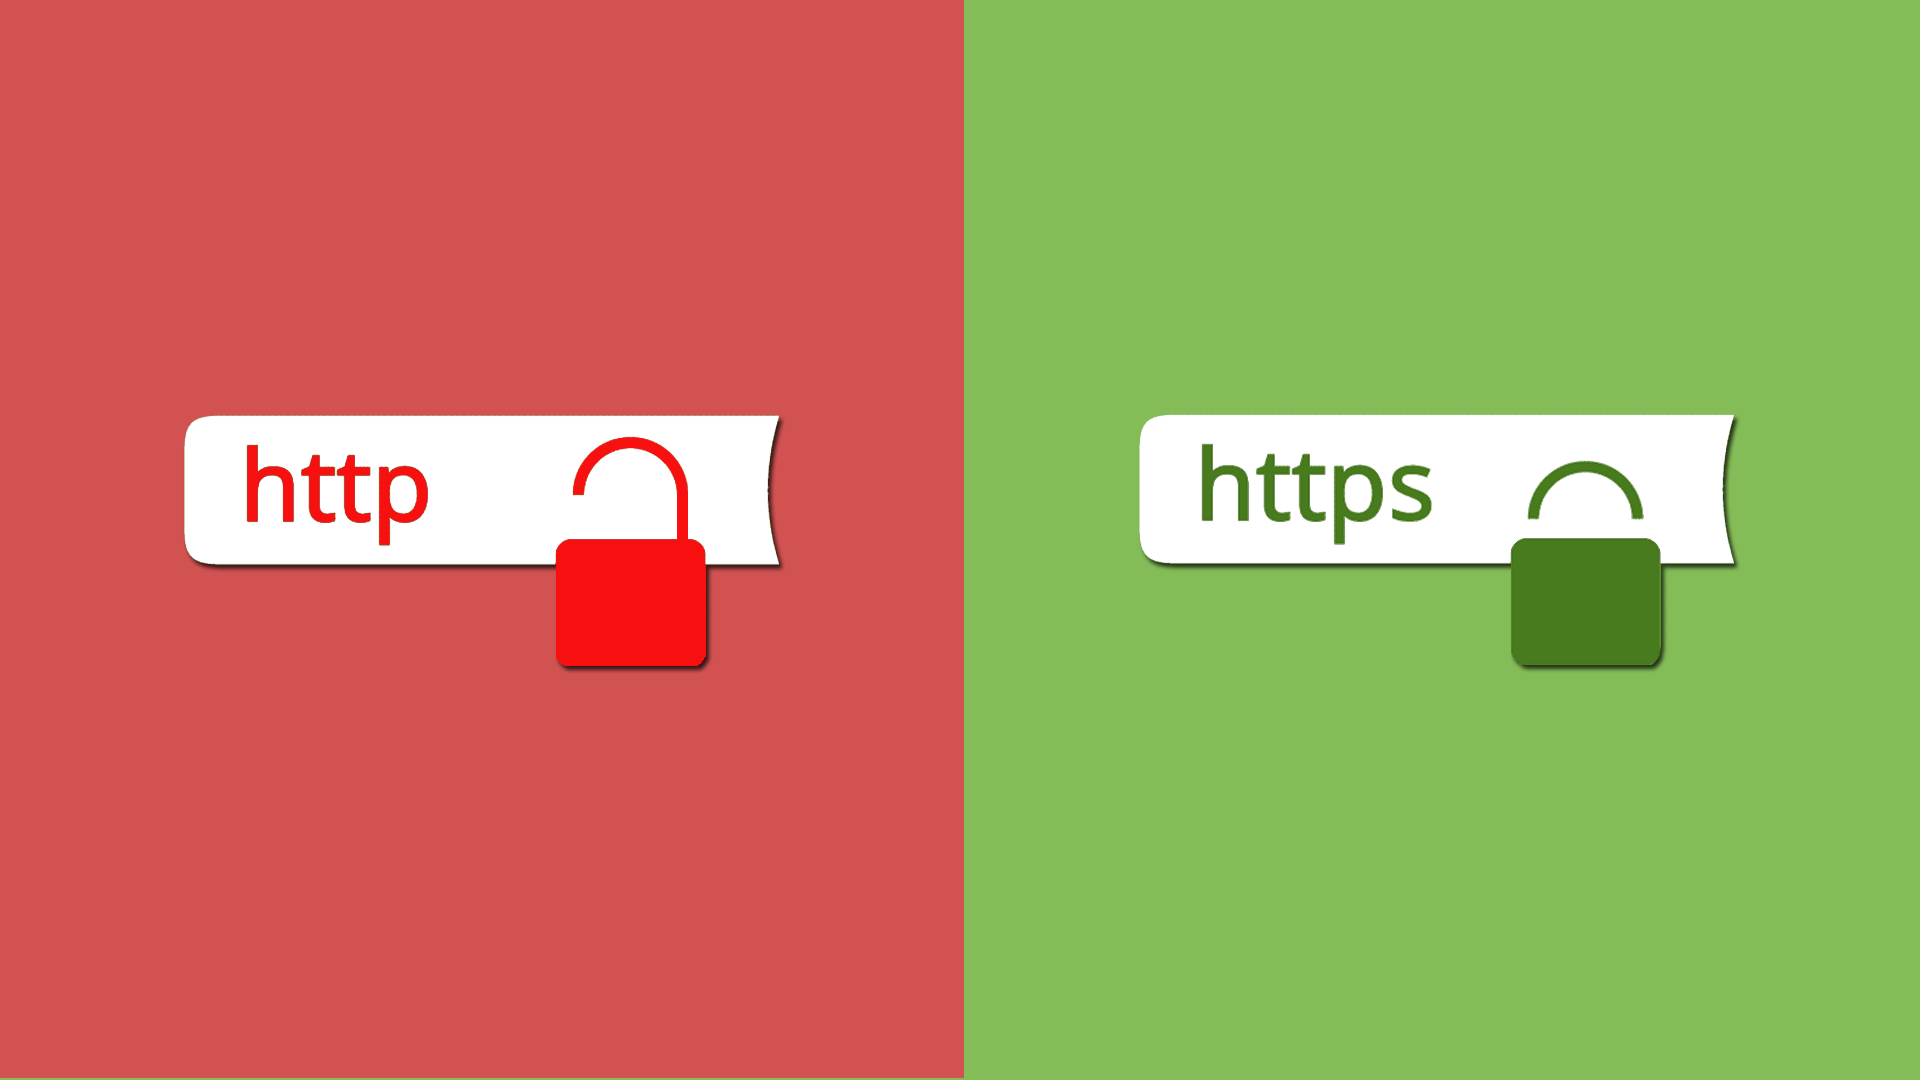 Laravel Middleware 301 Redirect, from http to https or non-www to www site redirect